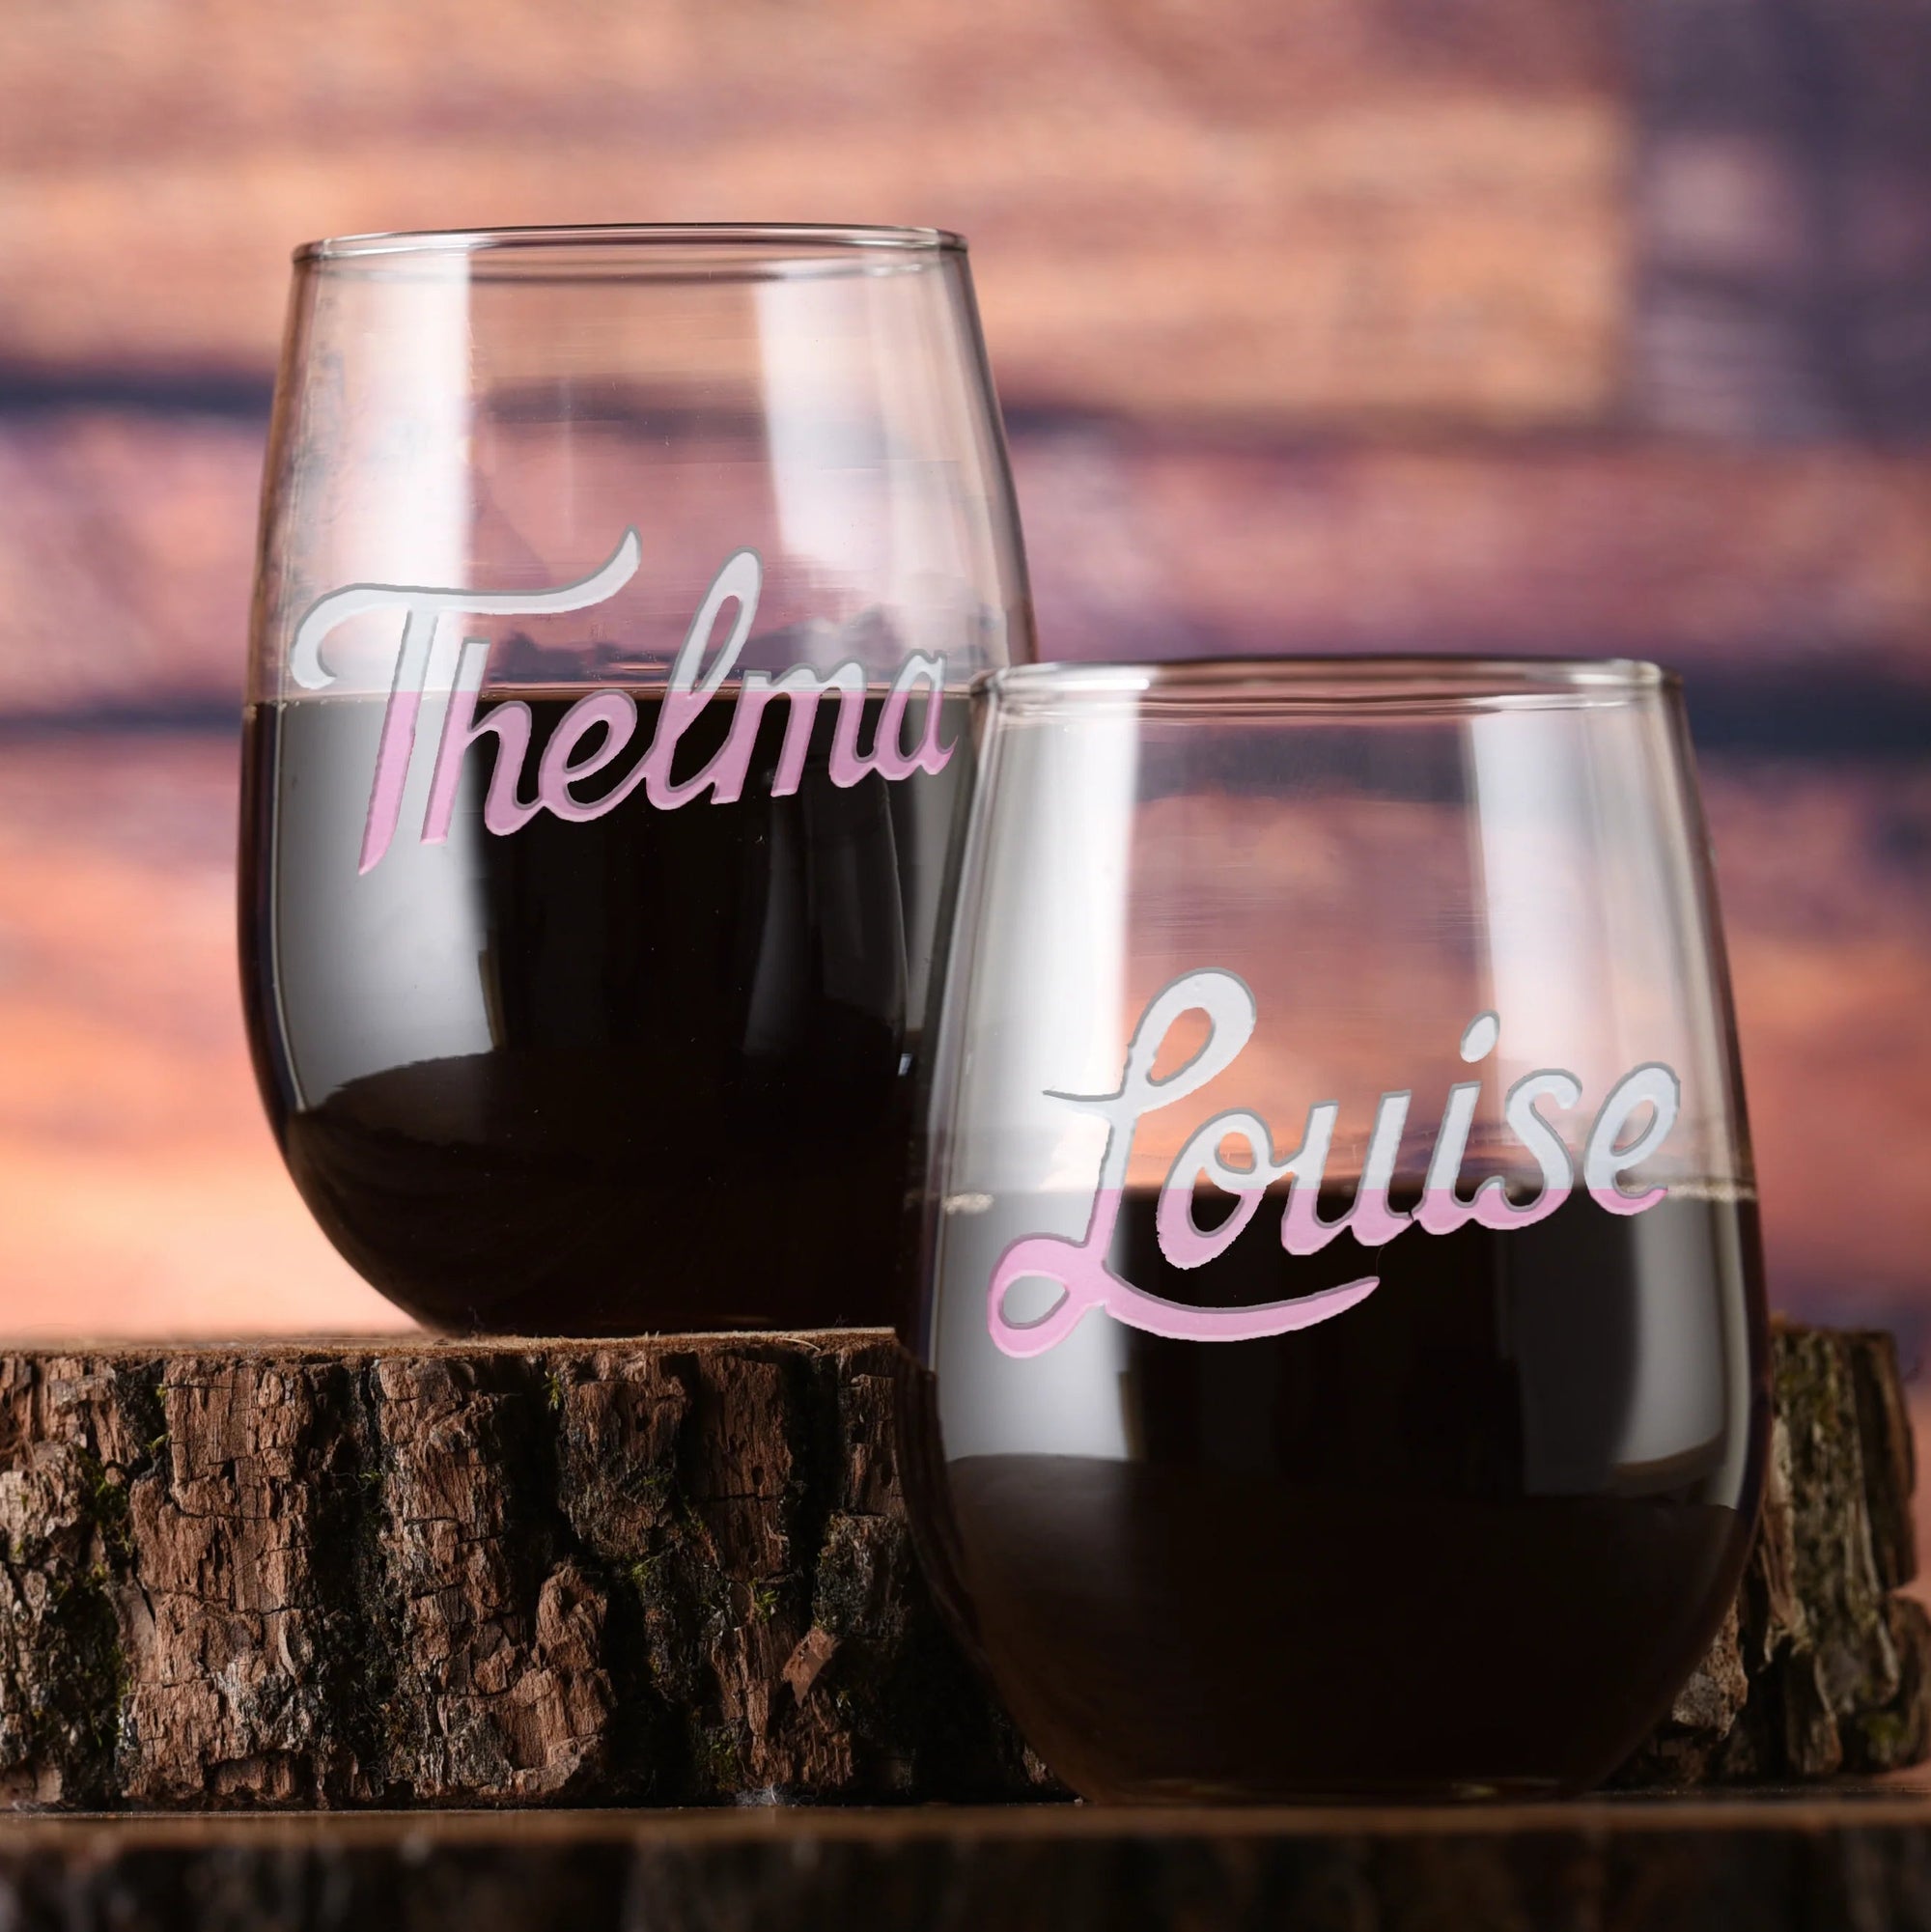 thelma and louise gifts